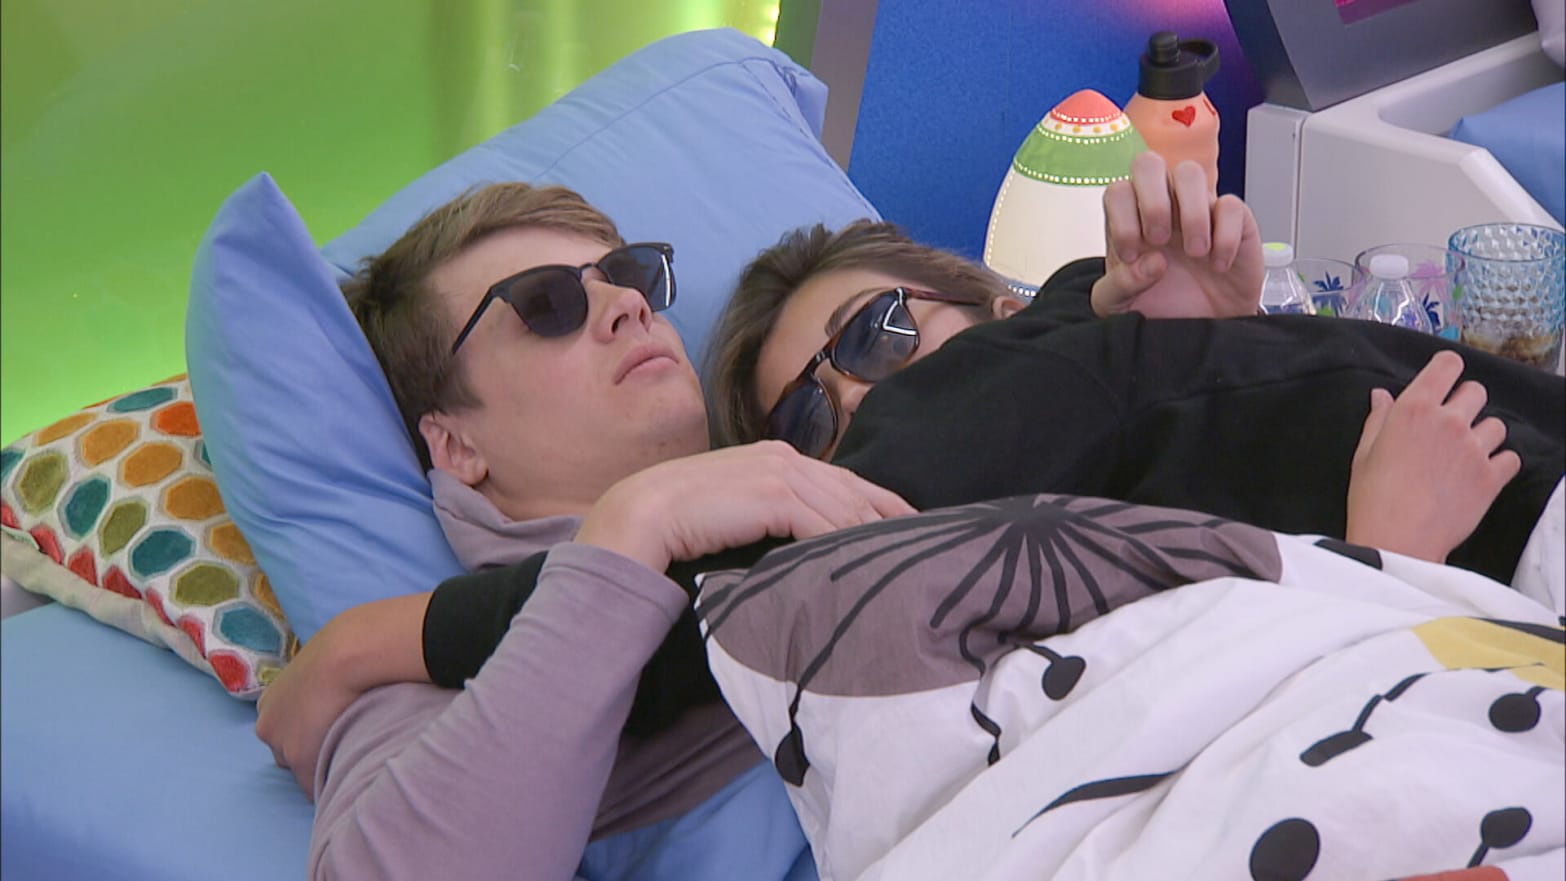 Brazzer Brother N Sister Sleeping Sex - Big Brother' Kyle and Alyssa Having Sex on Pool Floats Scarred Me for Life